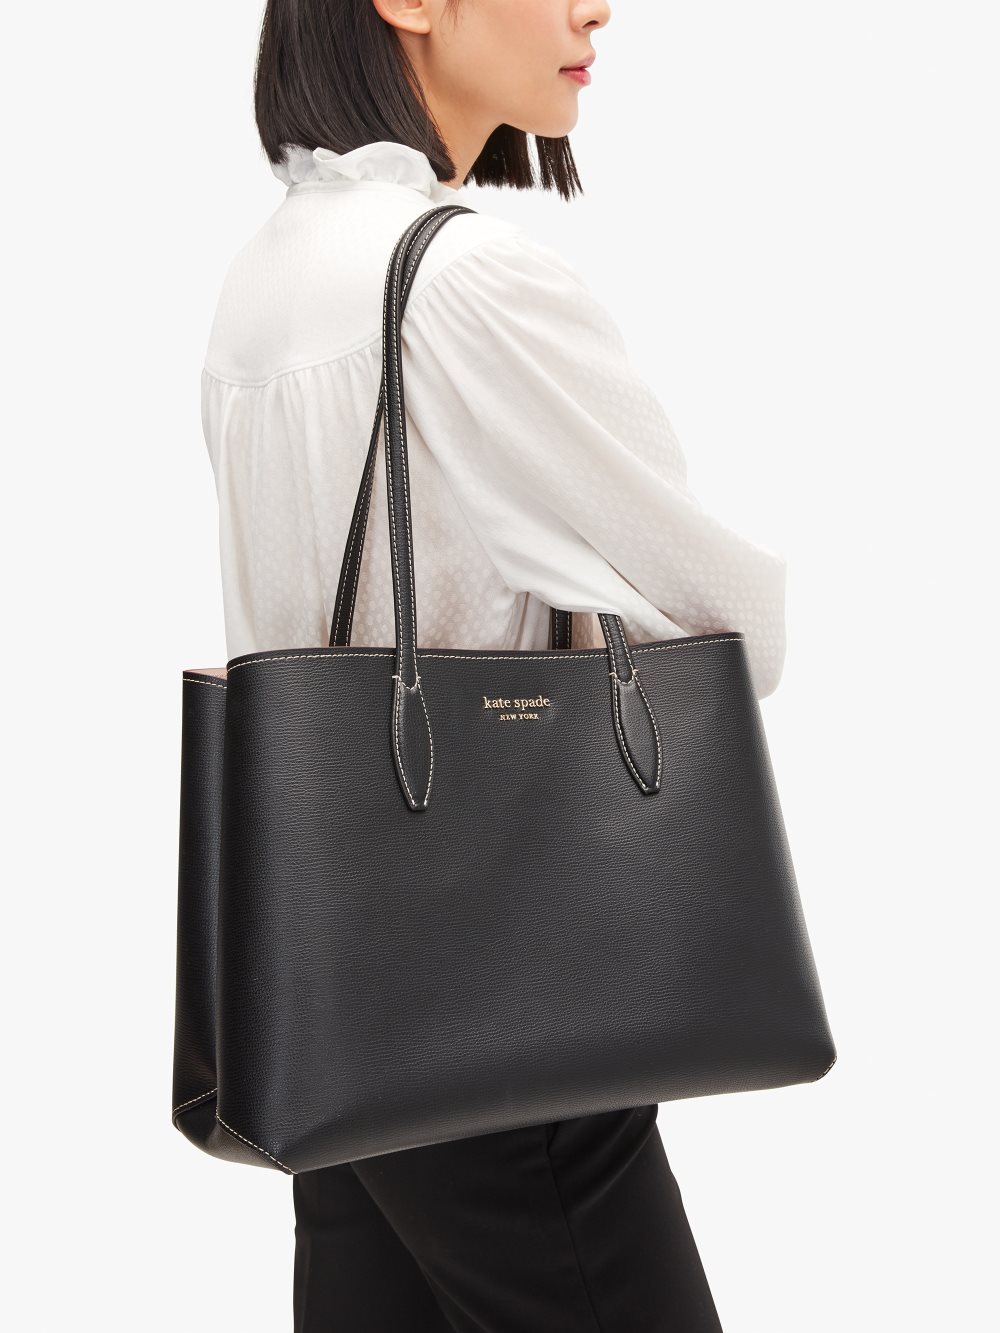 Women's black all day large tote | Kate Spade